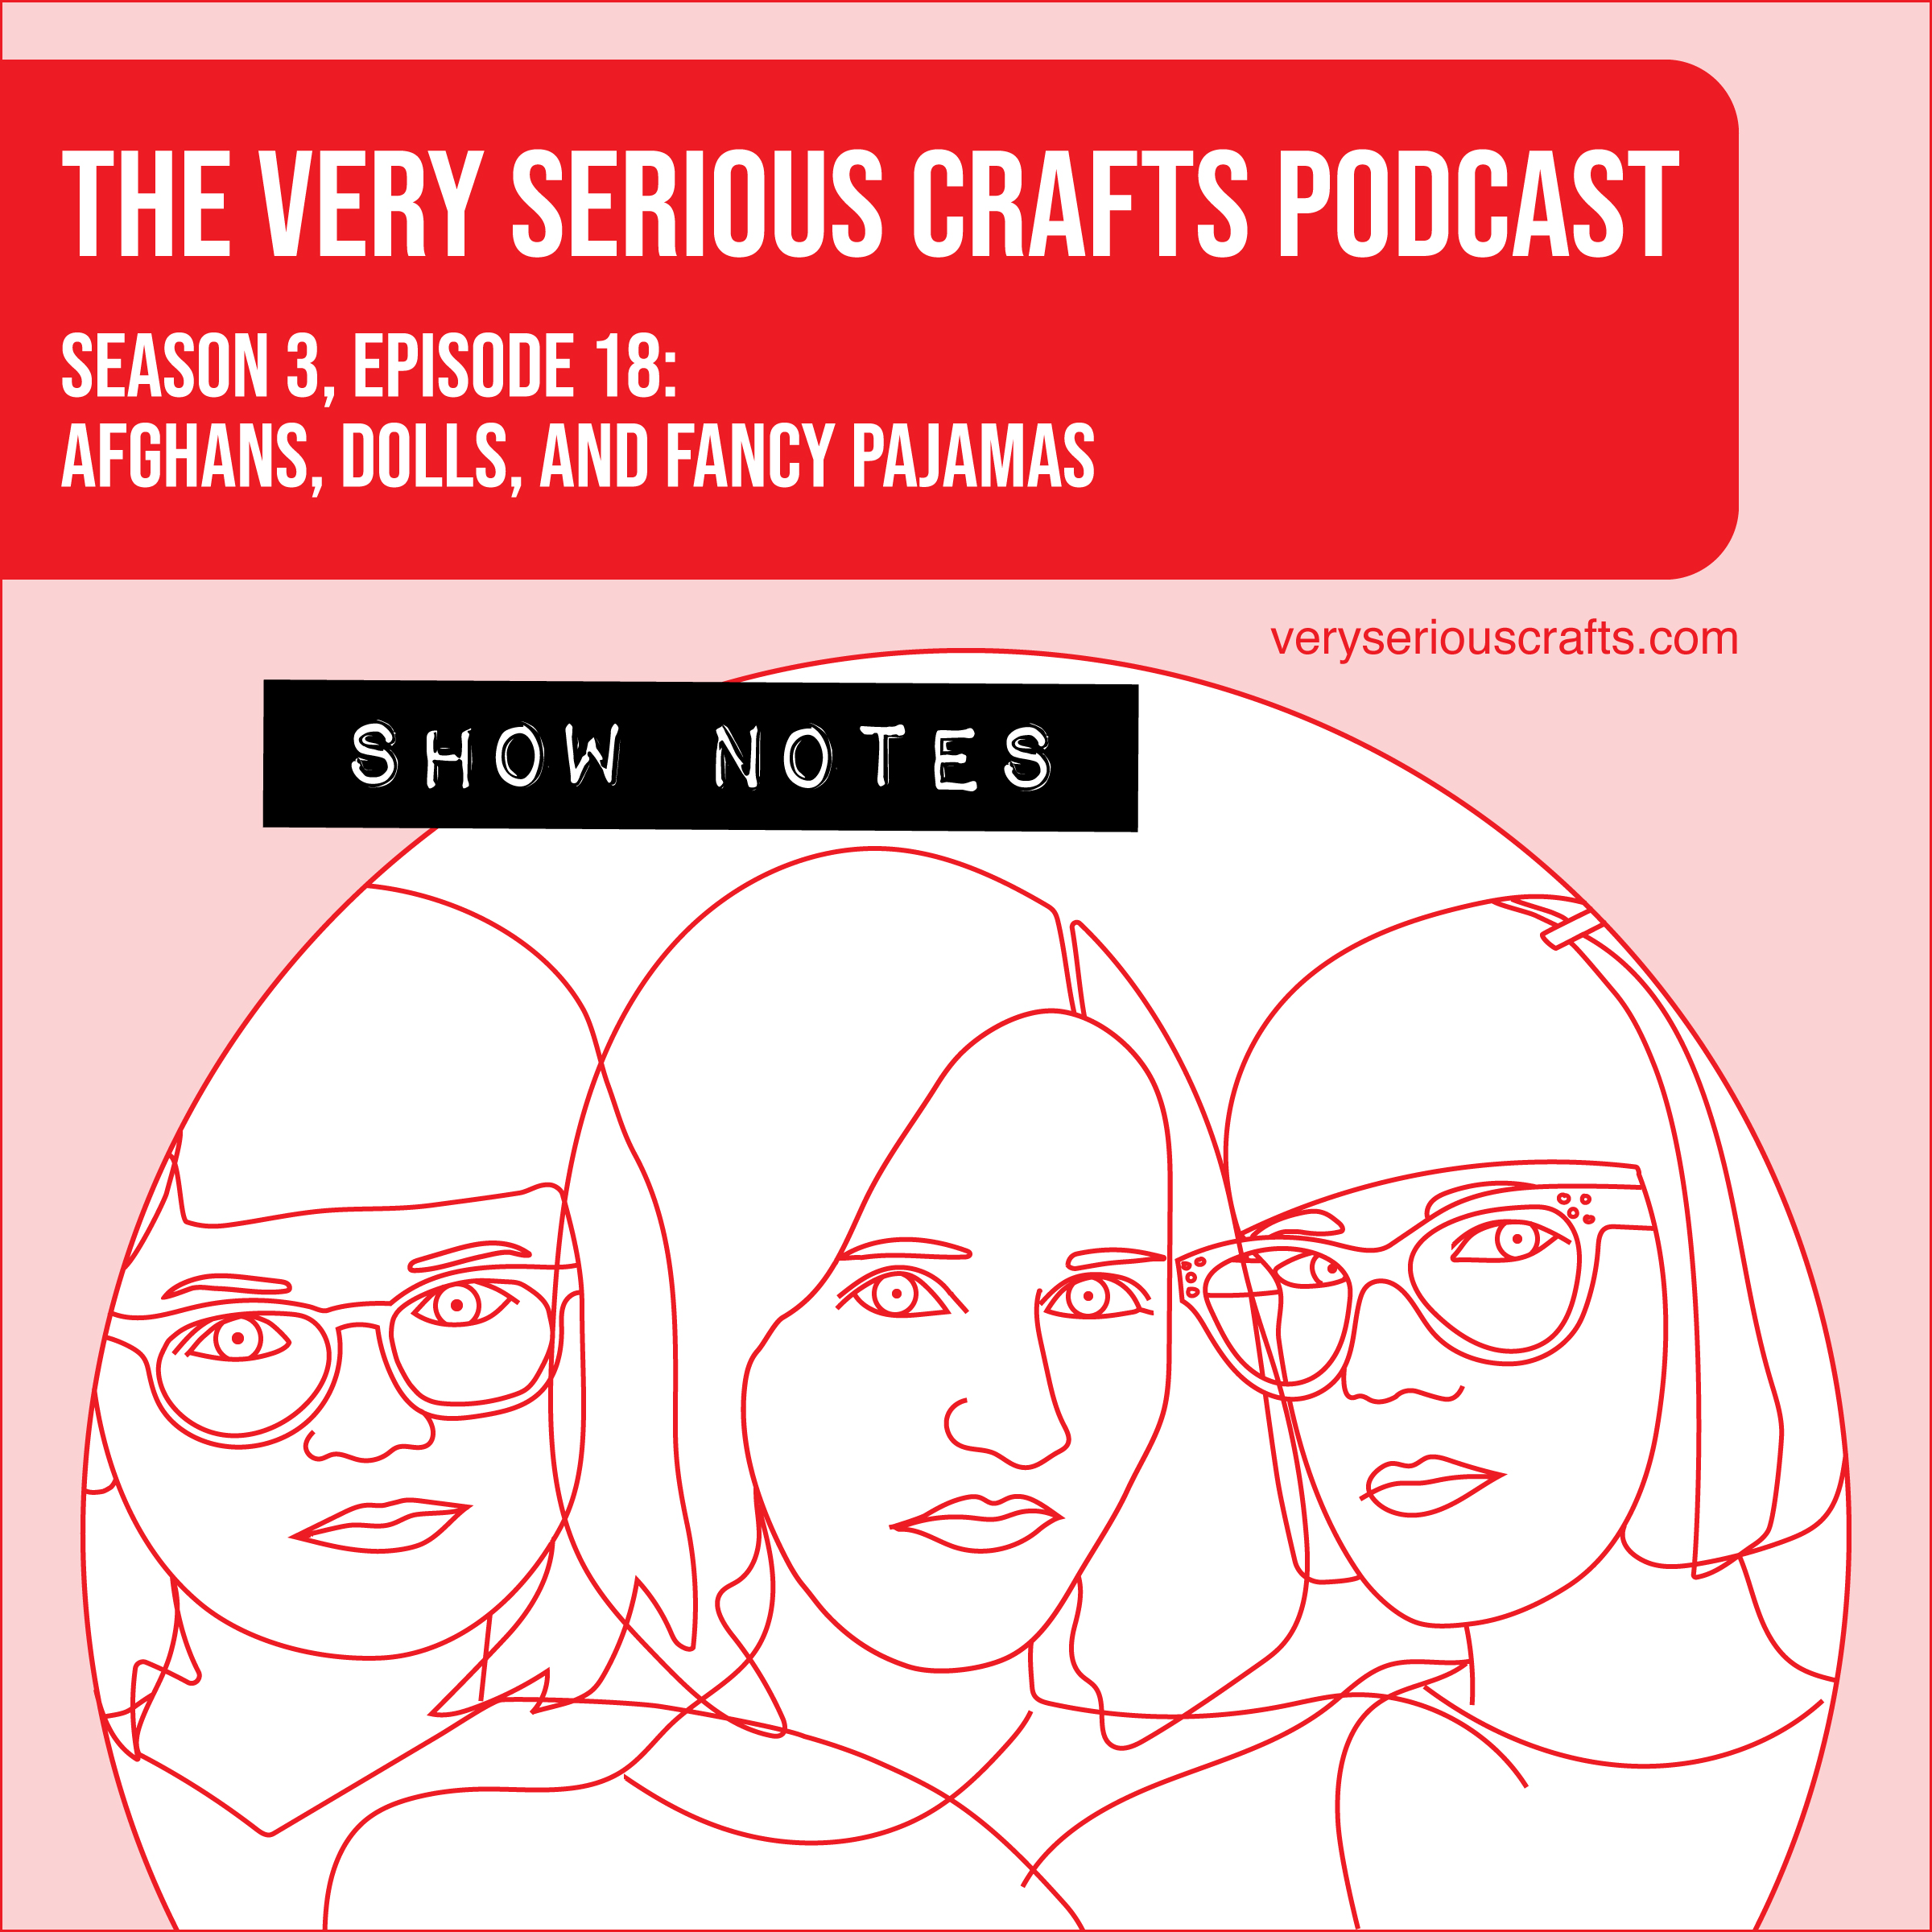 Download The Very Serious Crafts Podcast Season 3 Episode 18 Afghans Dolls And Fancy Pajamas Yellowimages Mockups